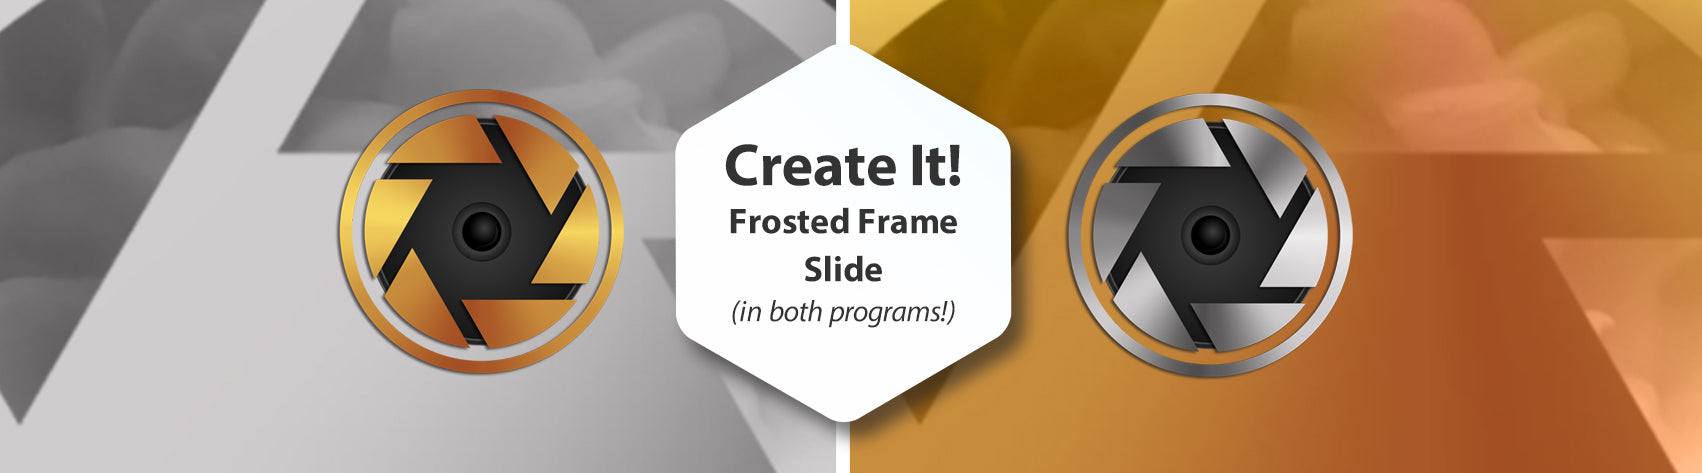 Create It - A Frosted Frame Slide